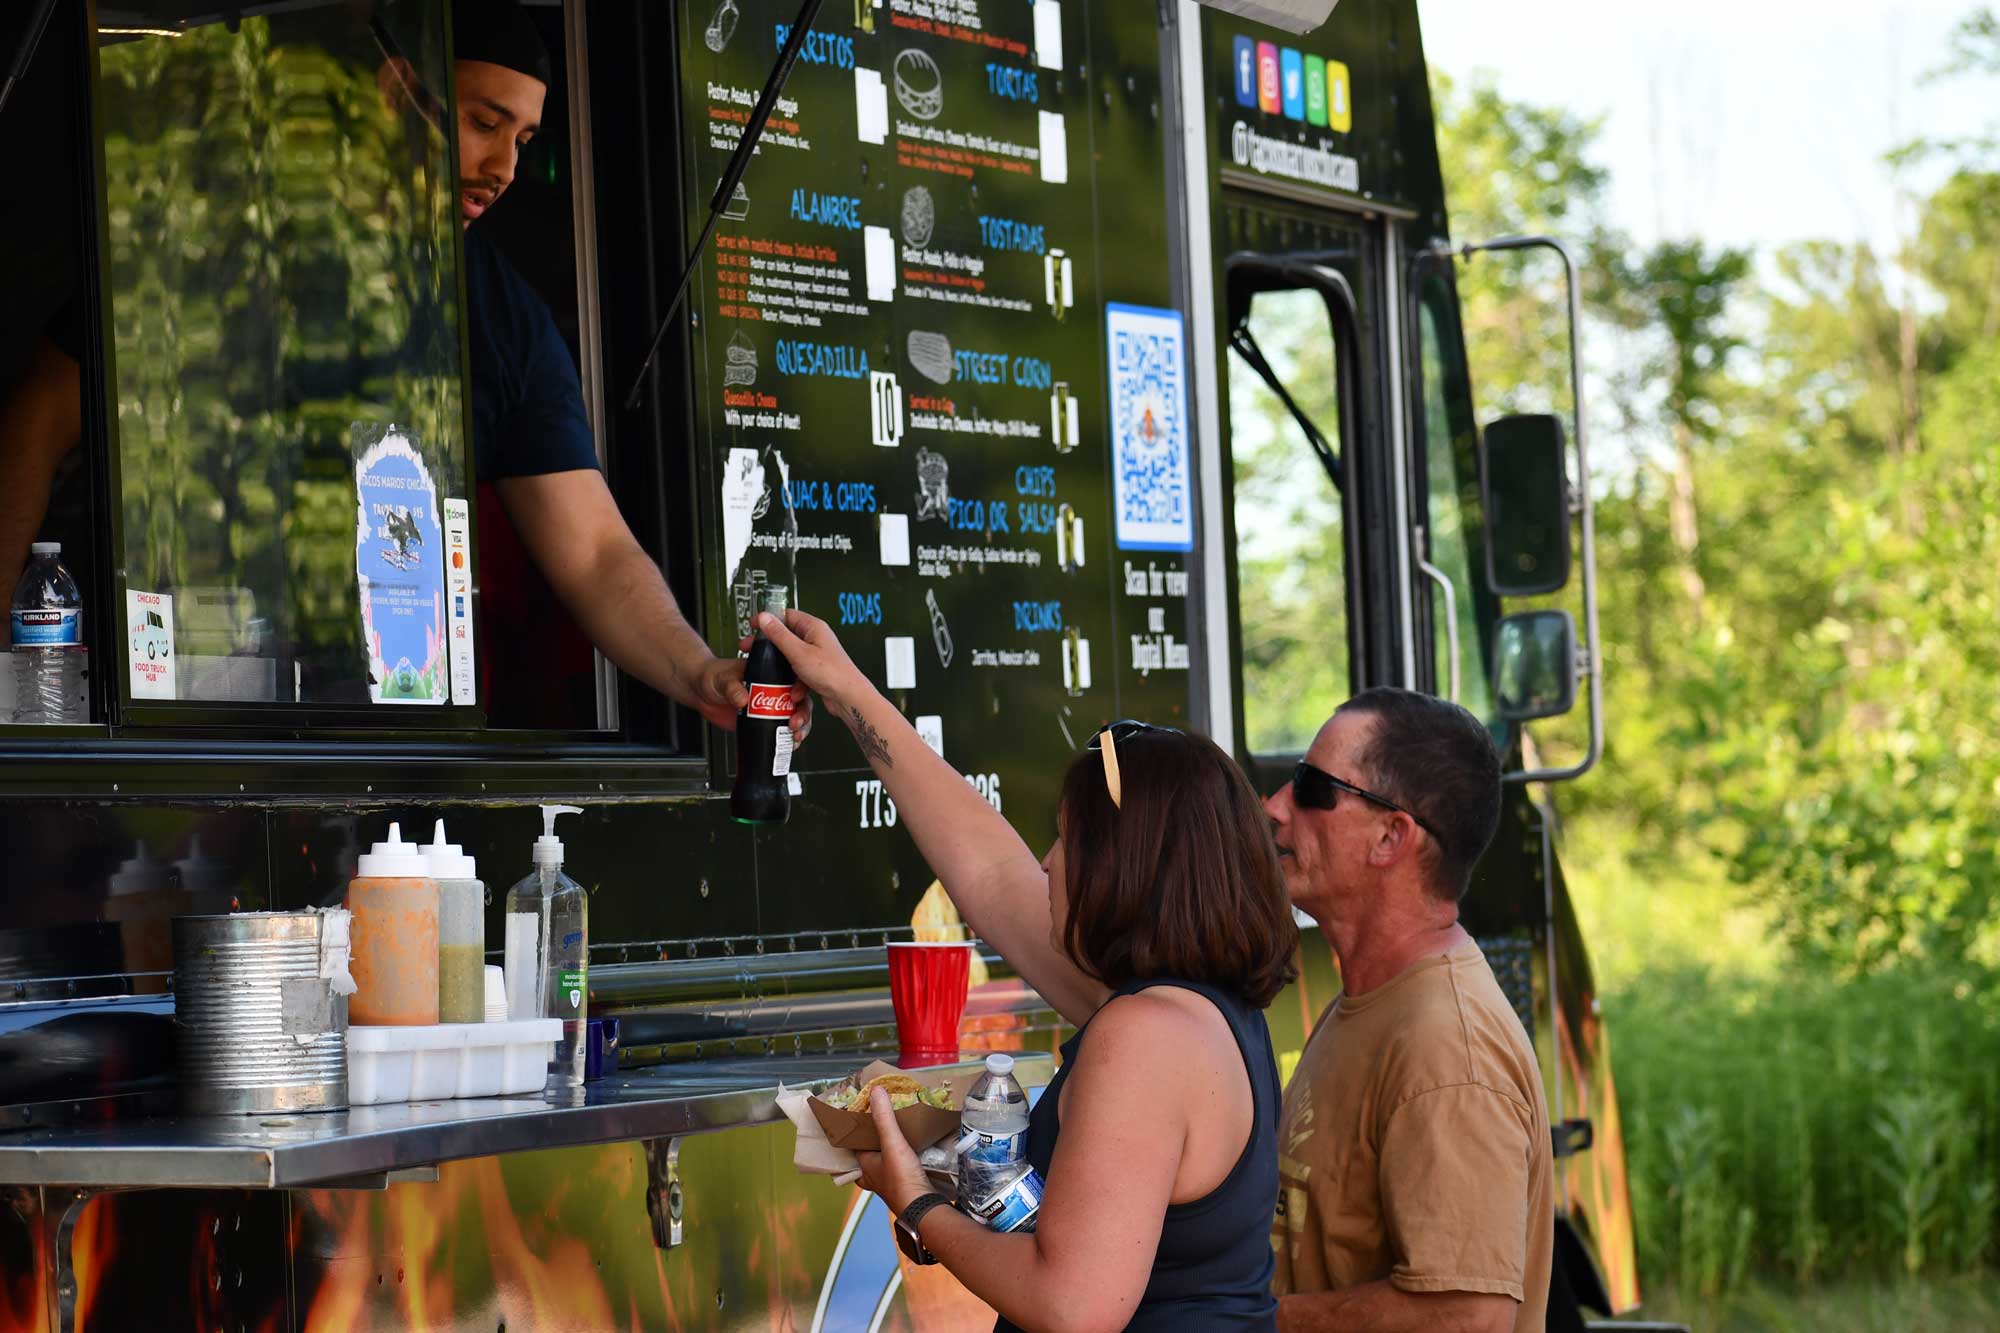 A man in a food truck hands a bottle of soda to a woman and man.